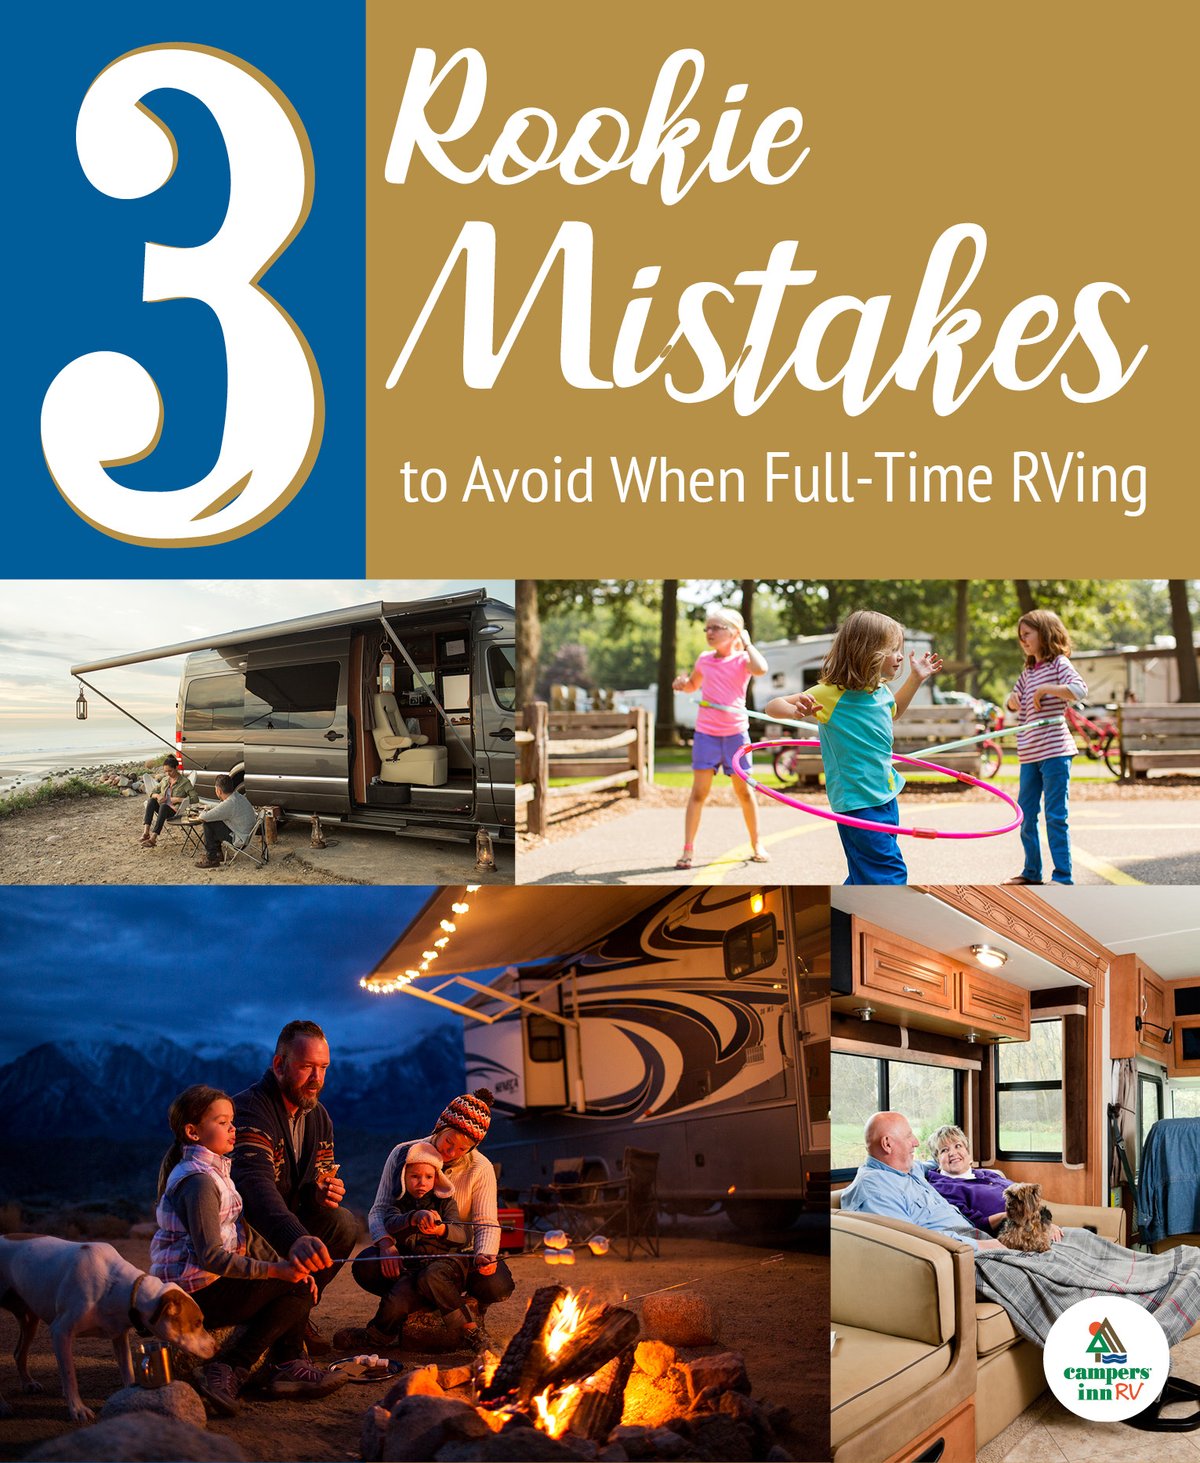 20190415_Pinterest_Covers_RVGuide4